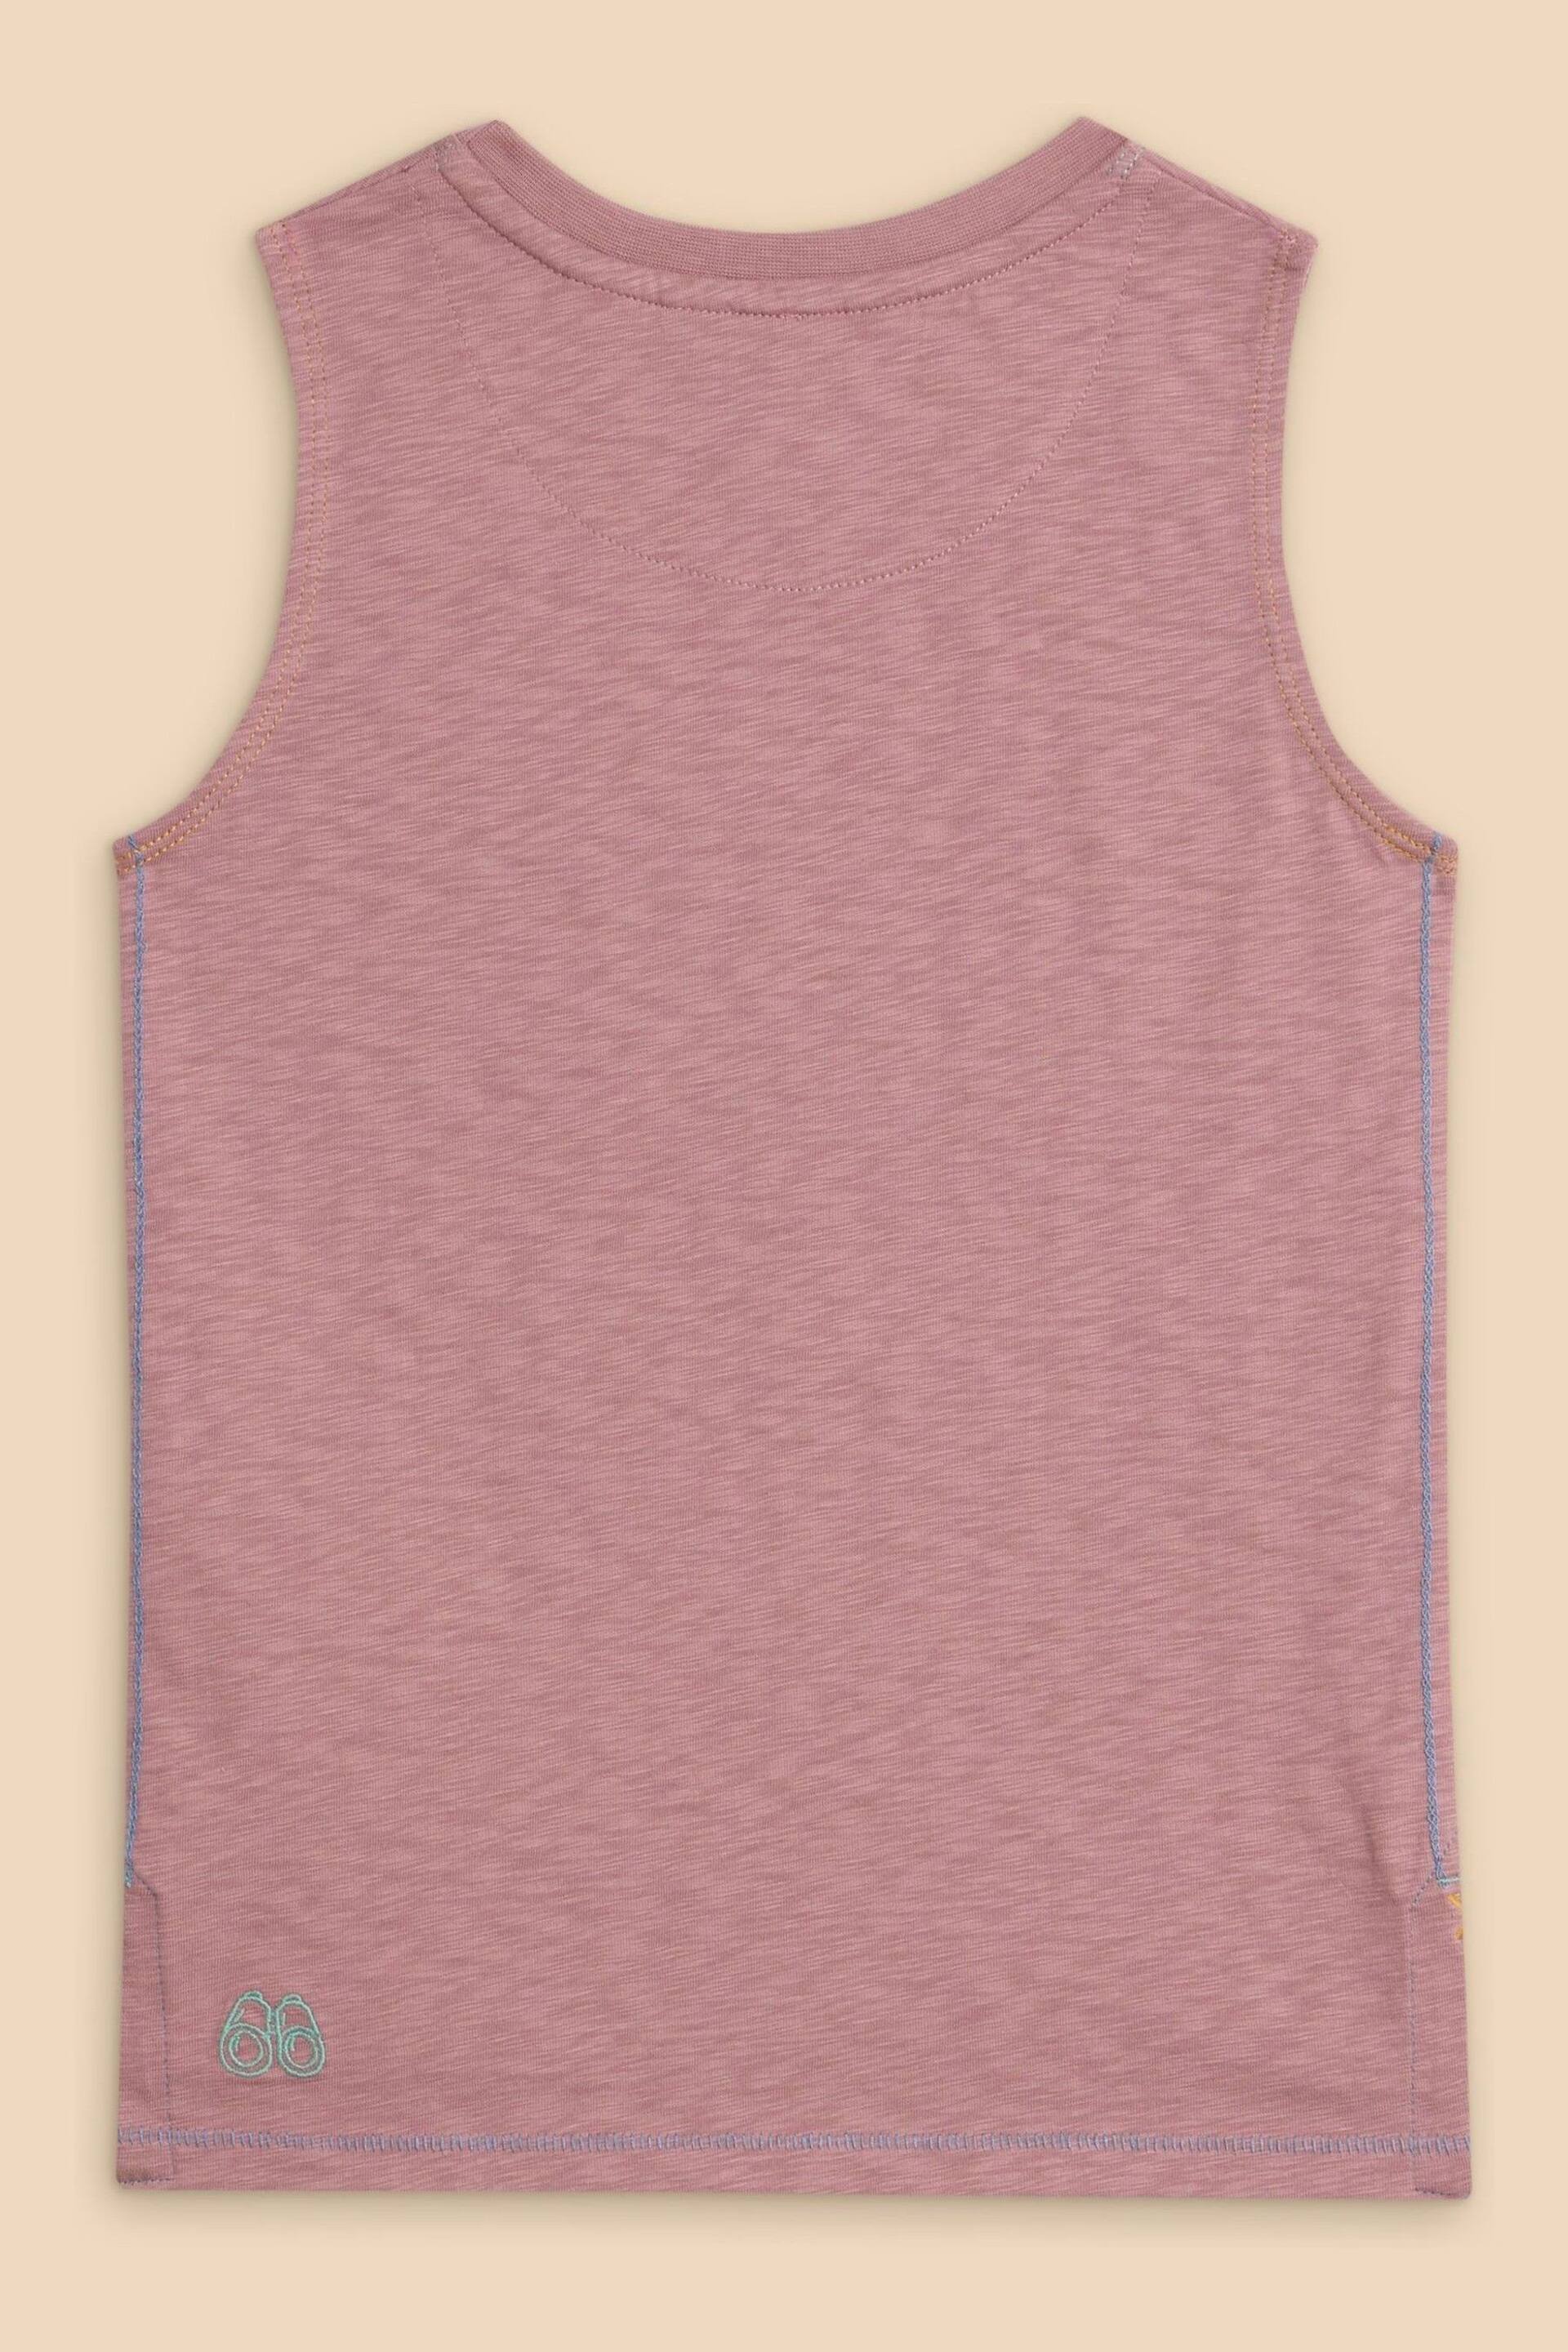 White Stuff Purple Scaling Waves Graphic Vest - Image 3 of 3